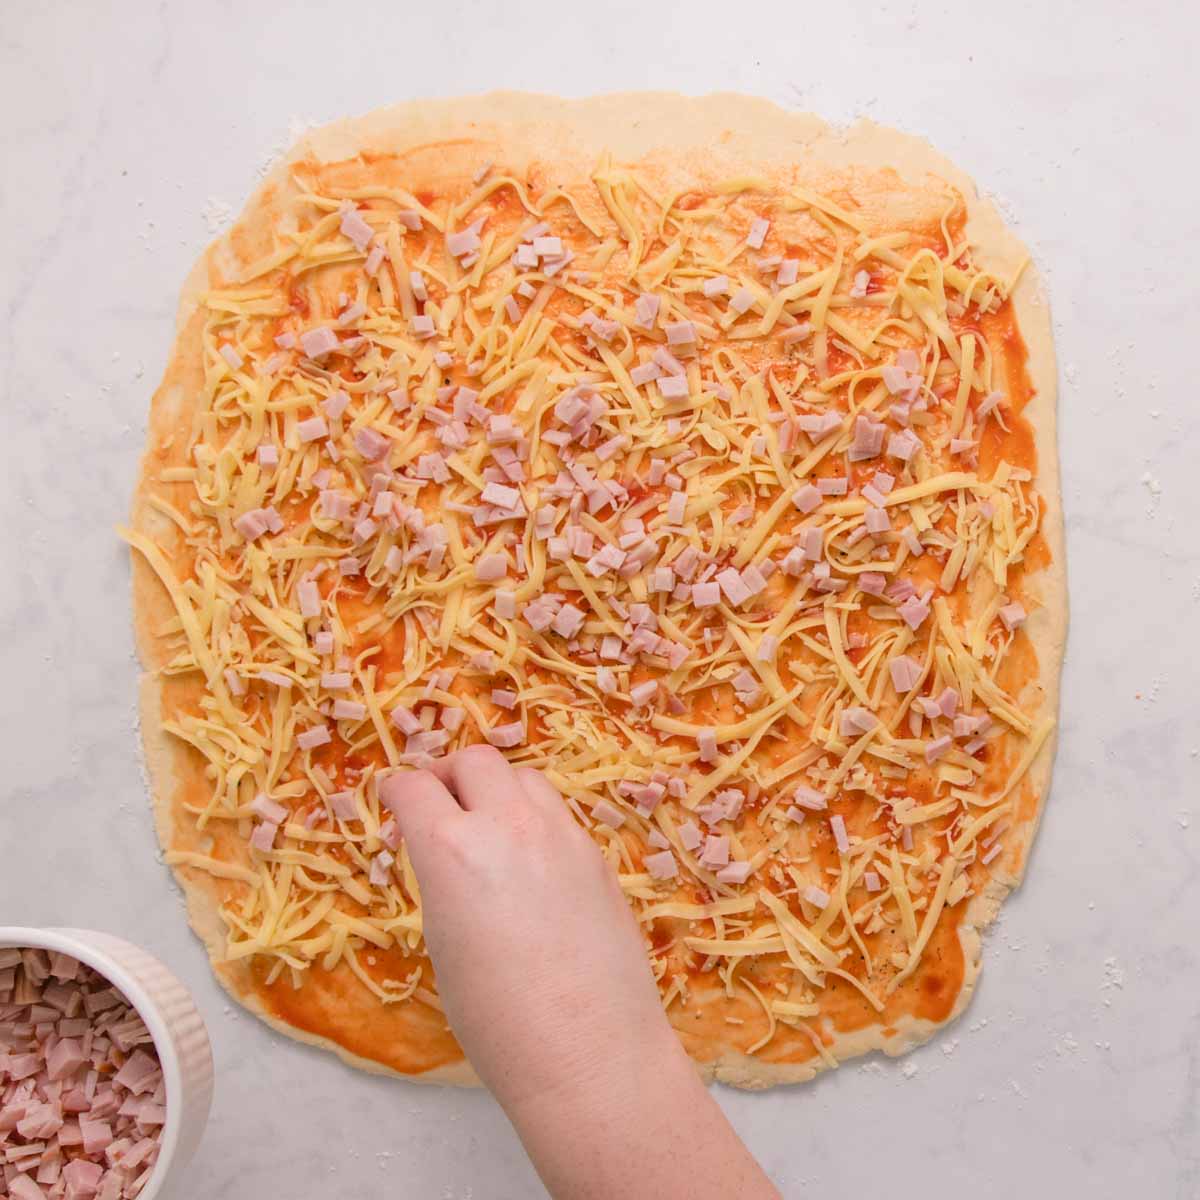 Spreading grated cheese and chopped ham over the surface of the dough.